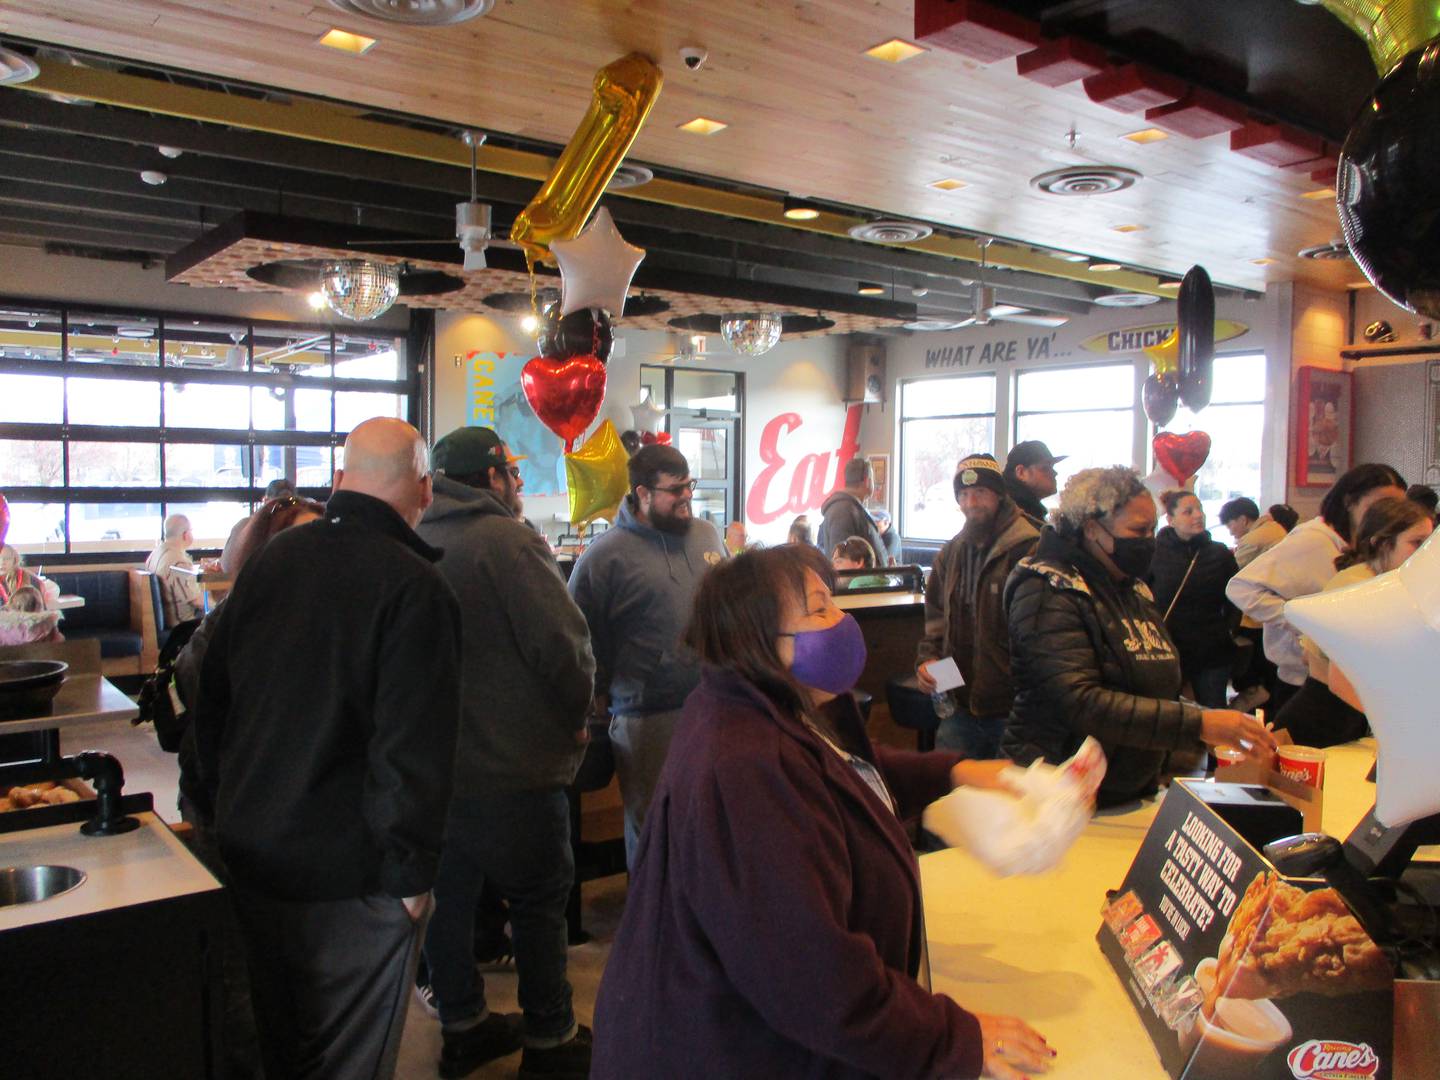 Customers place their orders at Raising Cane's Chicken Fingers, which opened Tuesday, March 8, 2022, at 3000 Plainfield Road in Joliet.